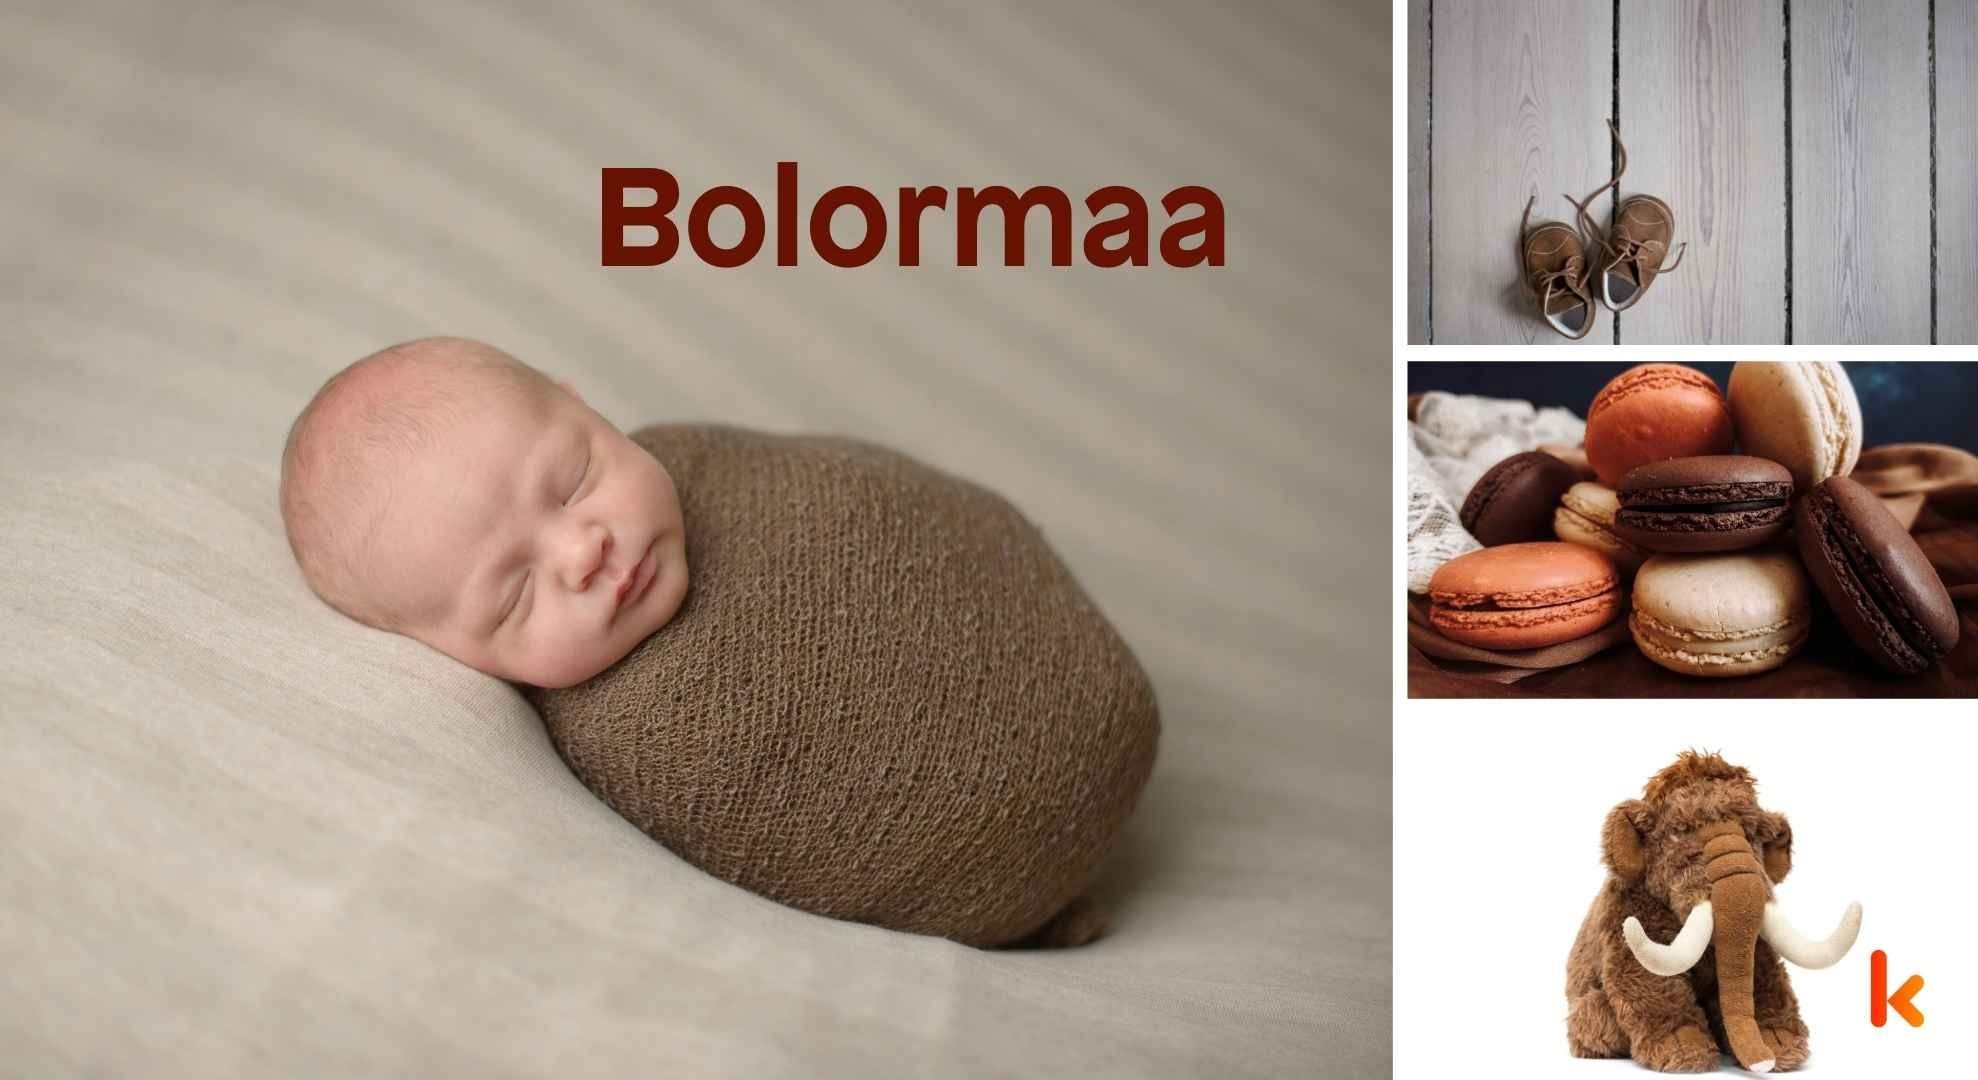 Meaning of the name Bolormaa